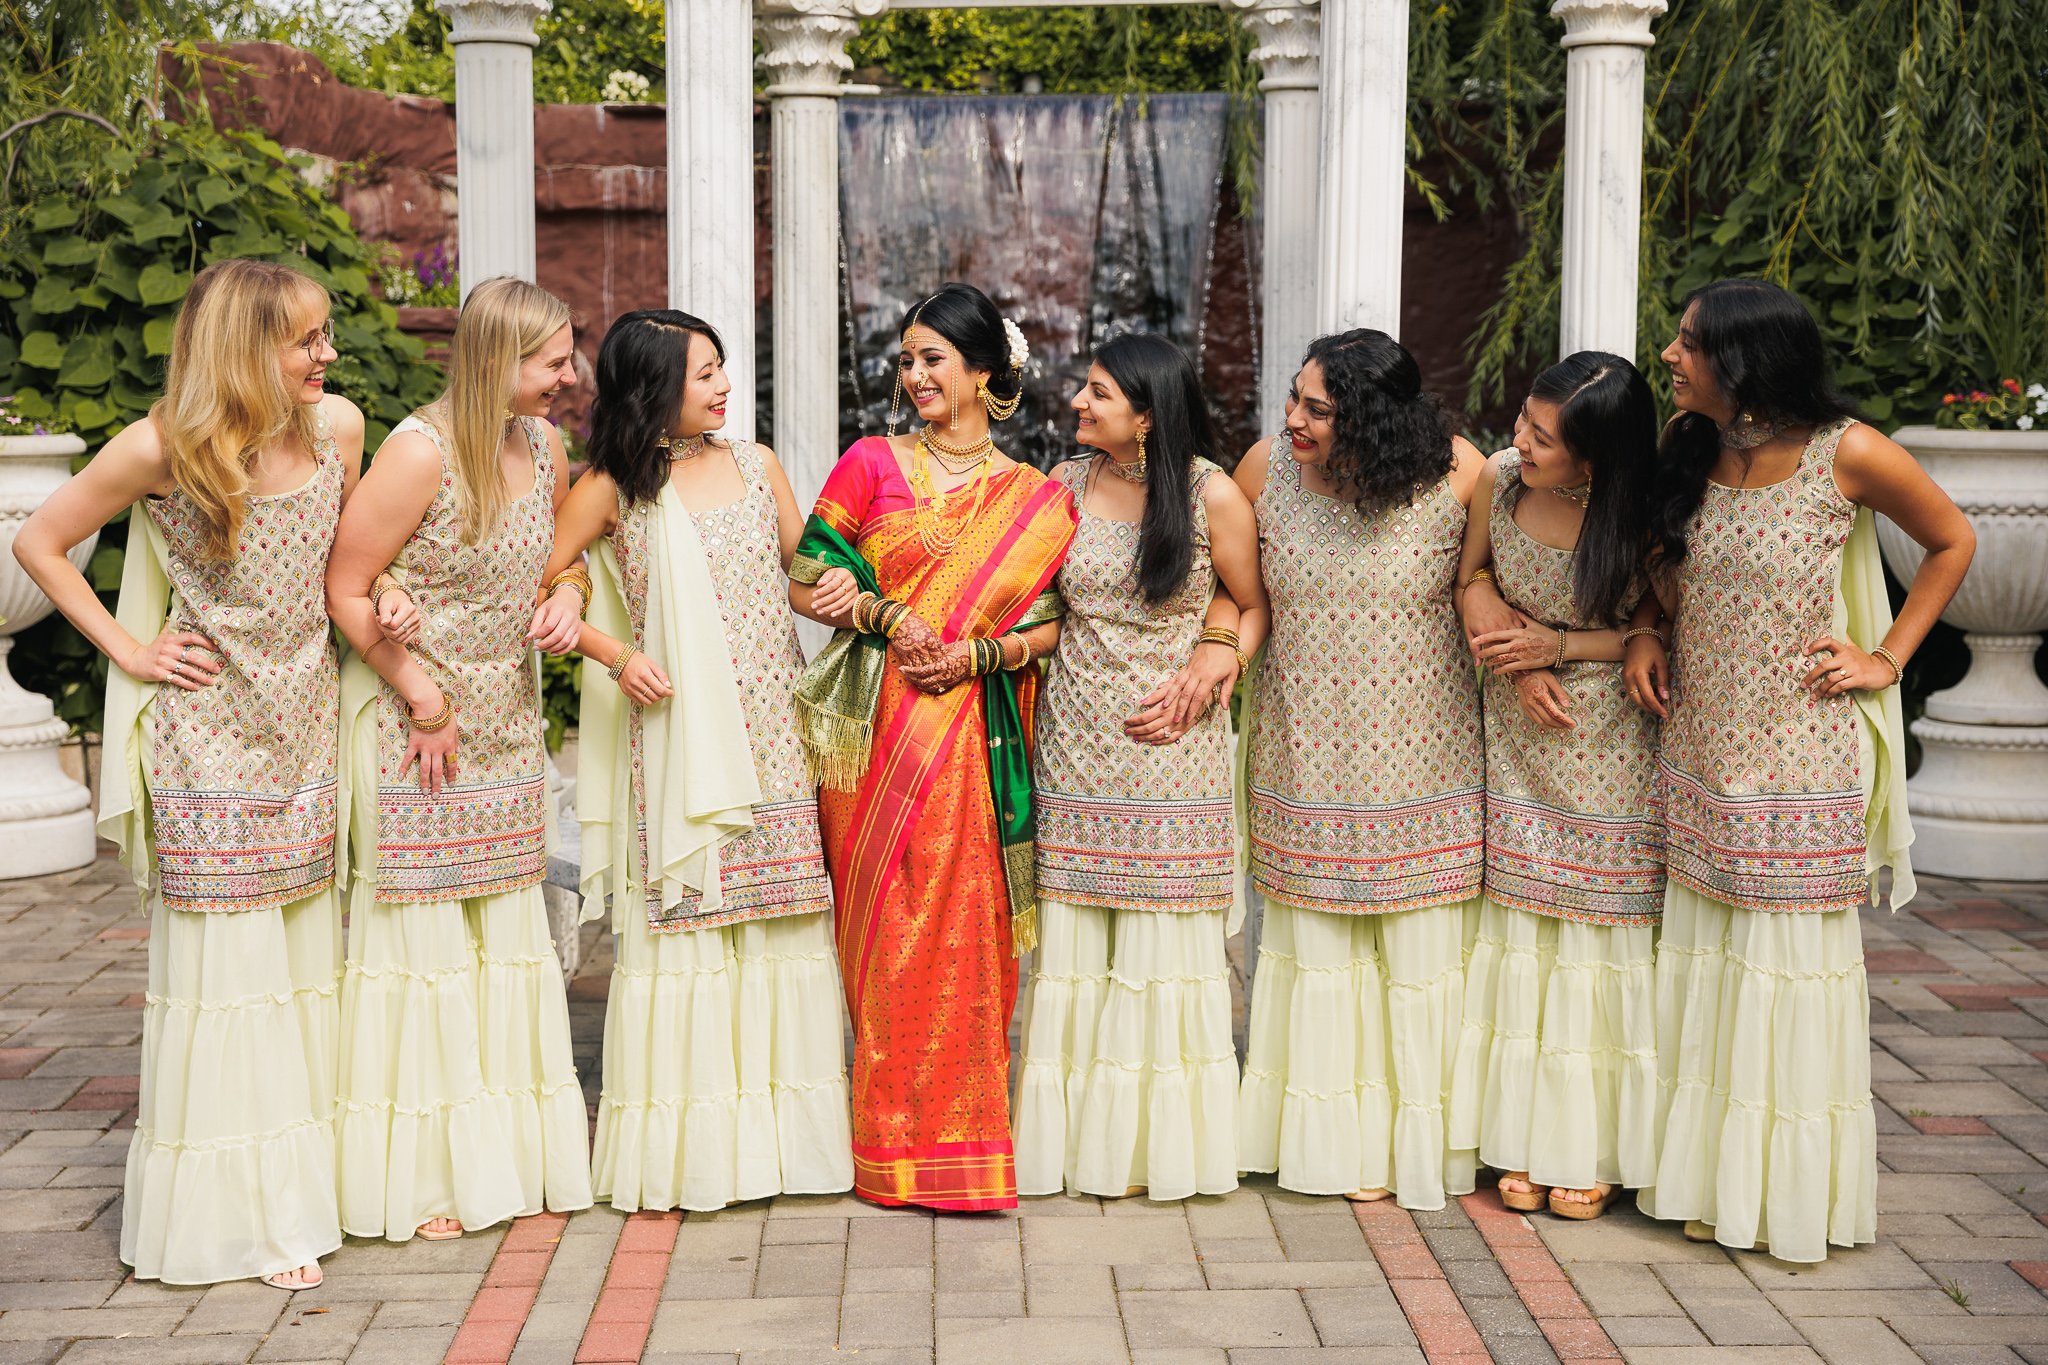 Group photo of bridesmaid in traditional Indian outfit